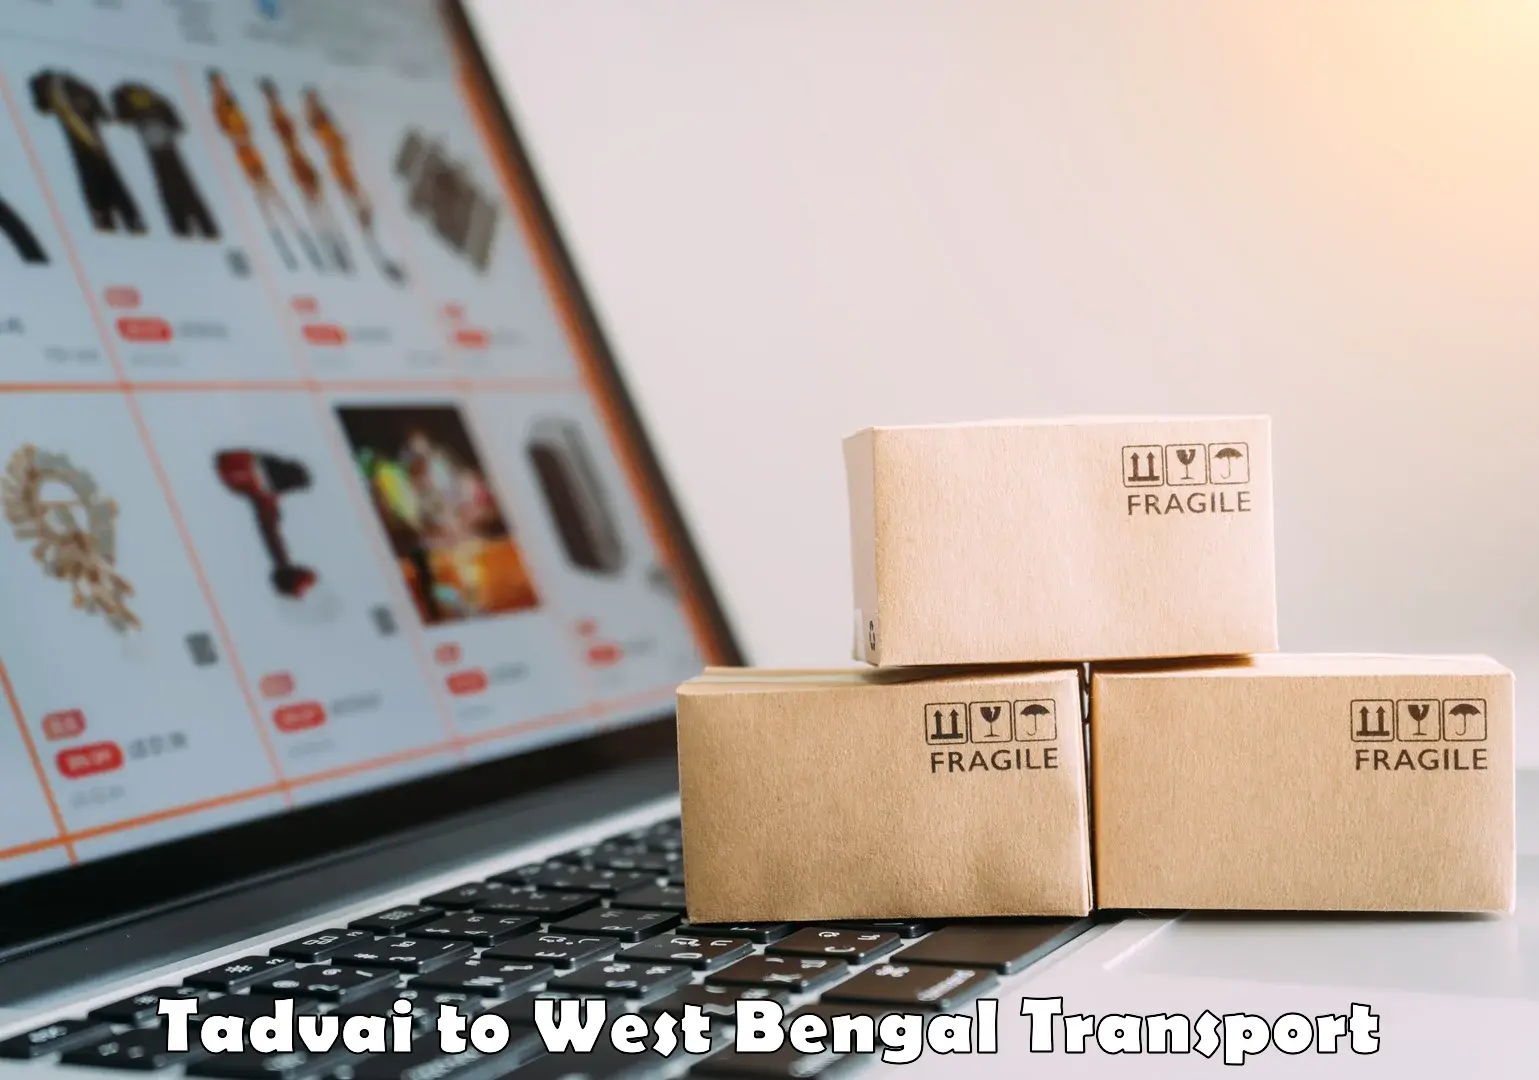 Cycle transportation service Tadvai to West Bengal